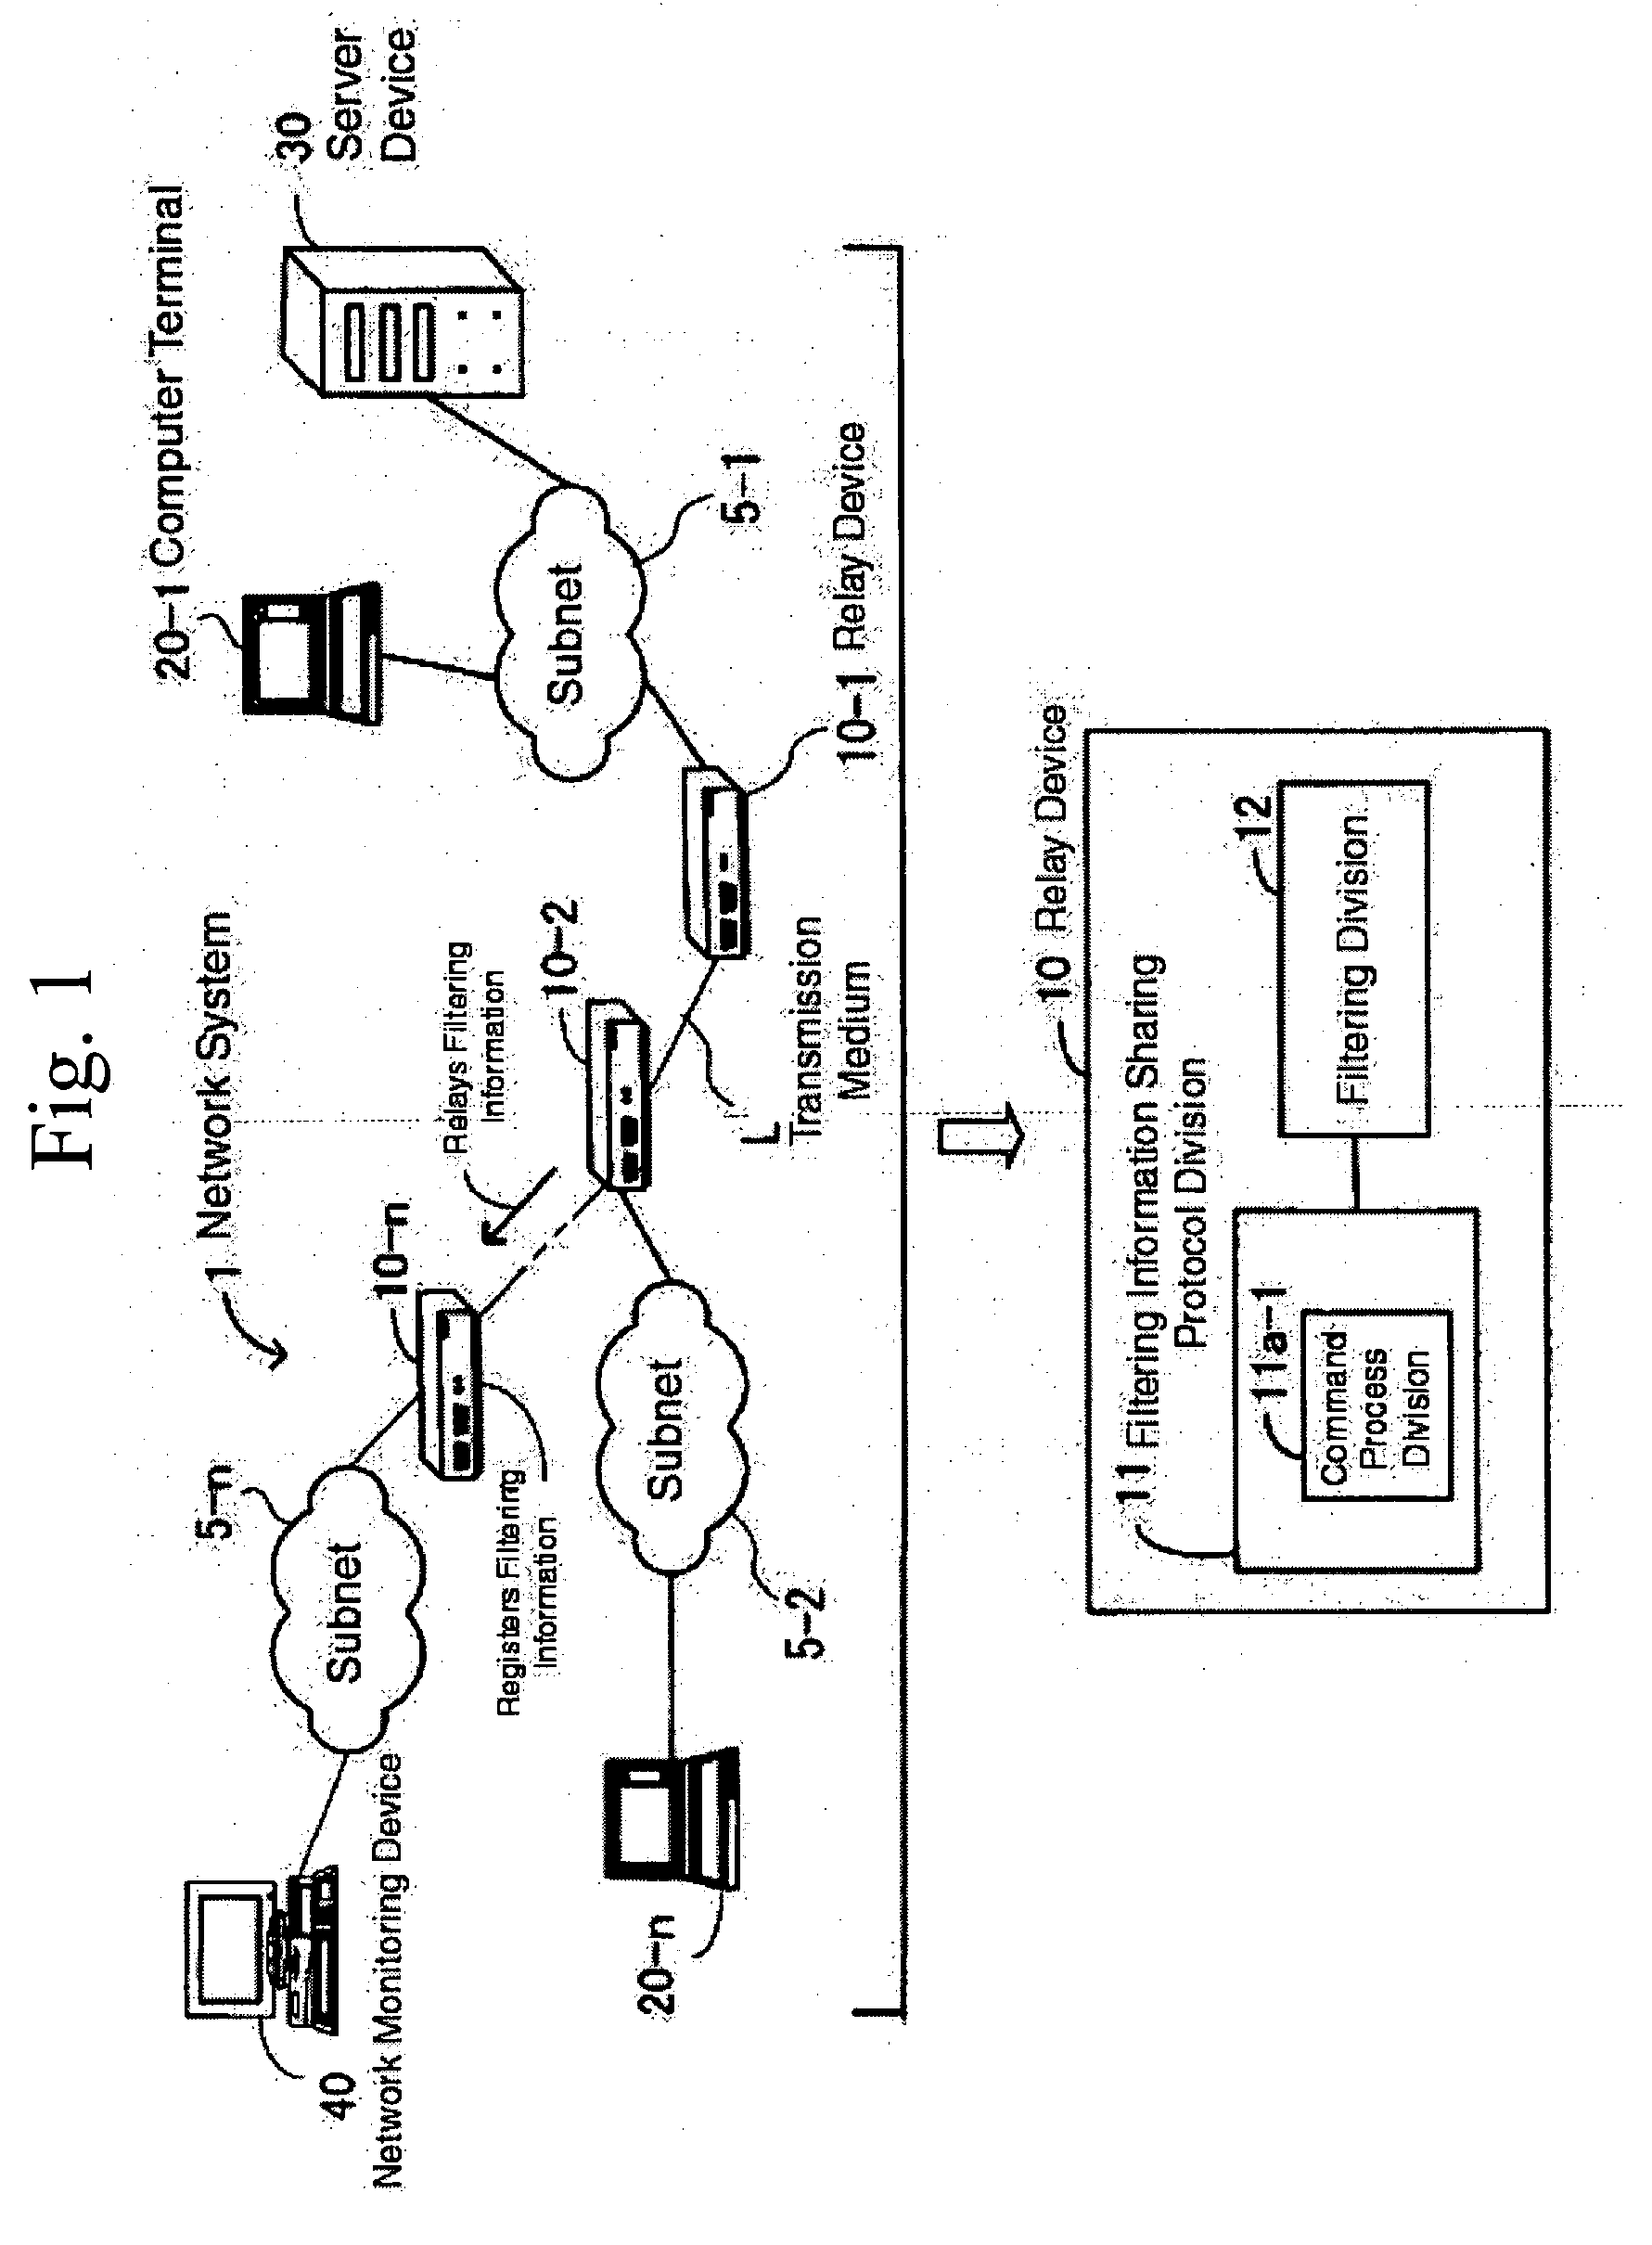 Network system with shared filtering information